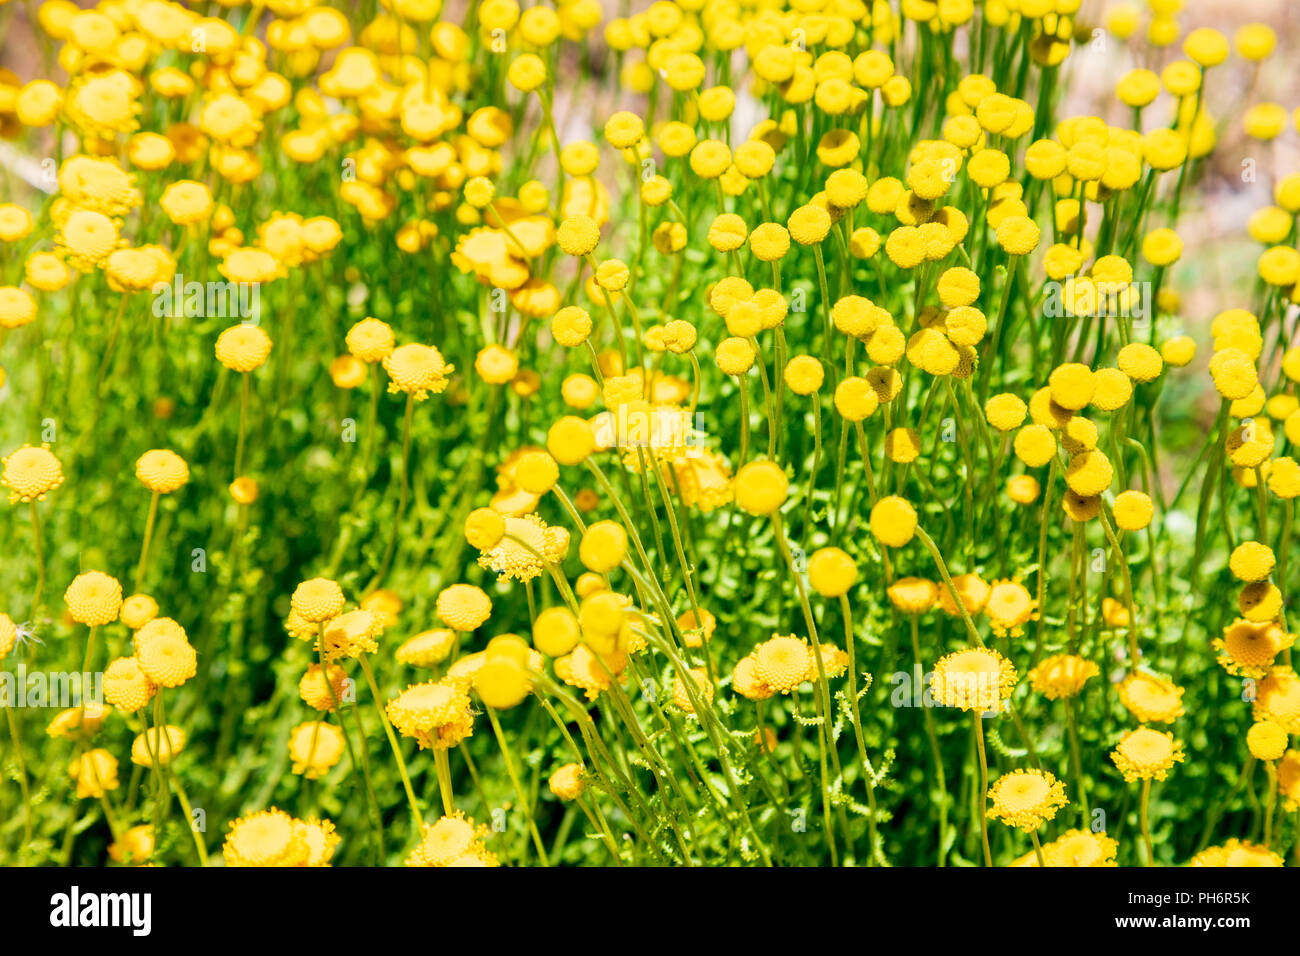 Santolina chamaecyparissus, traditional wild medicinal plant with yellow flowers Stock Photo